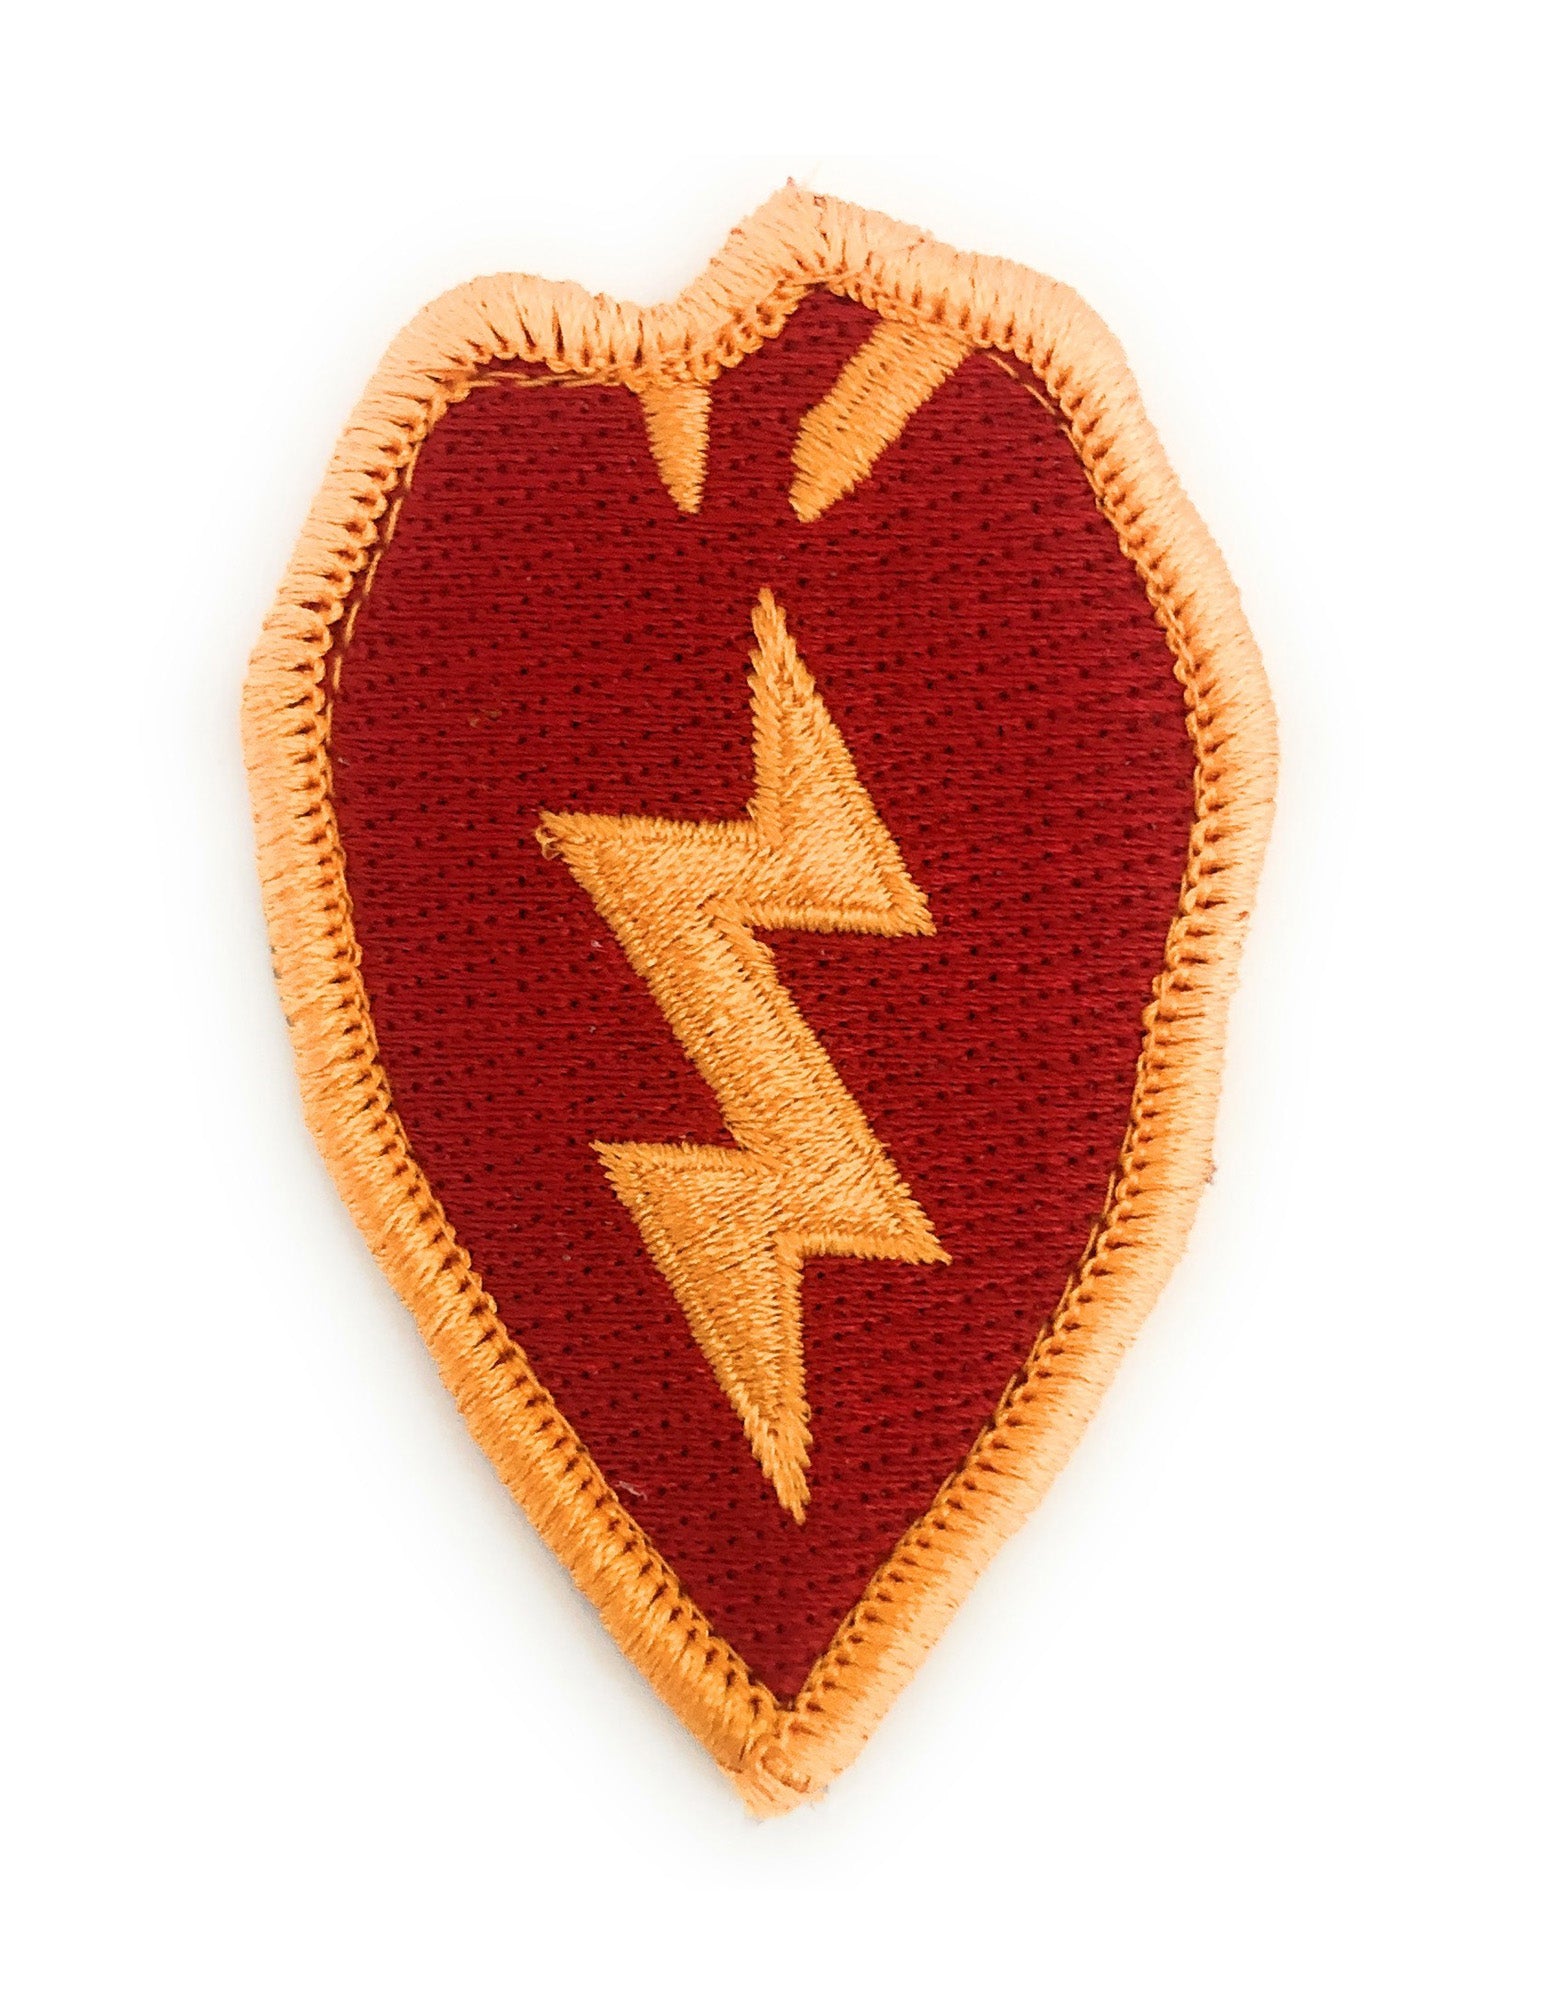 Army Patch (Color)